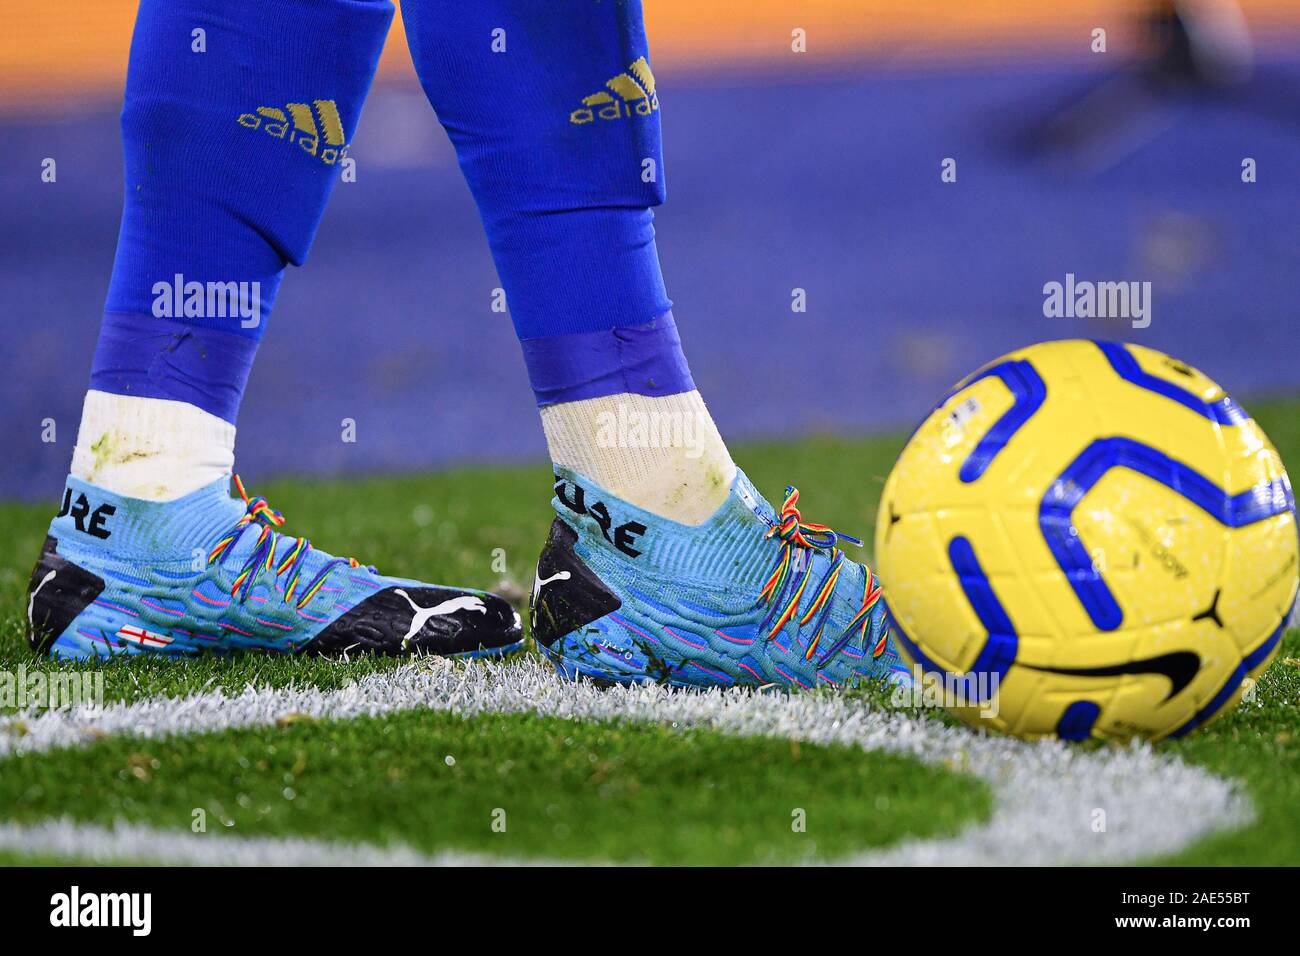 4th December 19 King Power Stadium Leicester England Premier League Leicester City V Watford Boots Of James Maddison 10 Of Leicester City With Rainbow Laces Credit Jon Hobley News Images Stock Photo Alamy